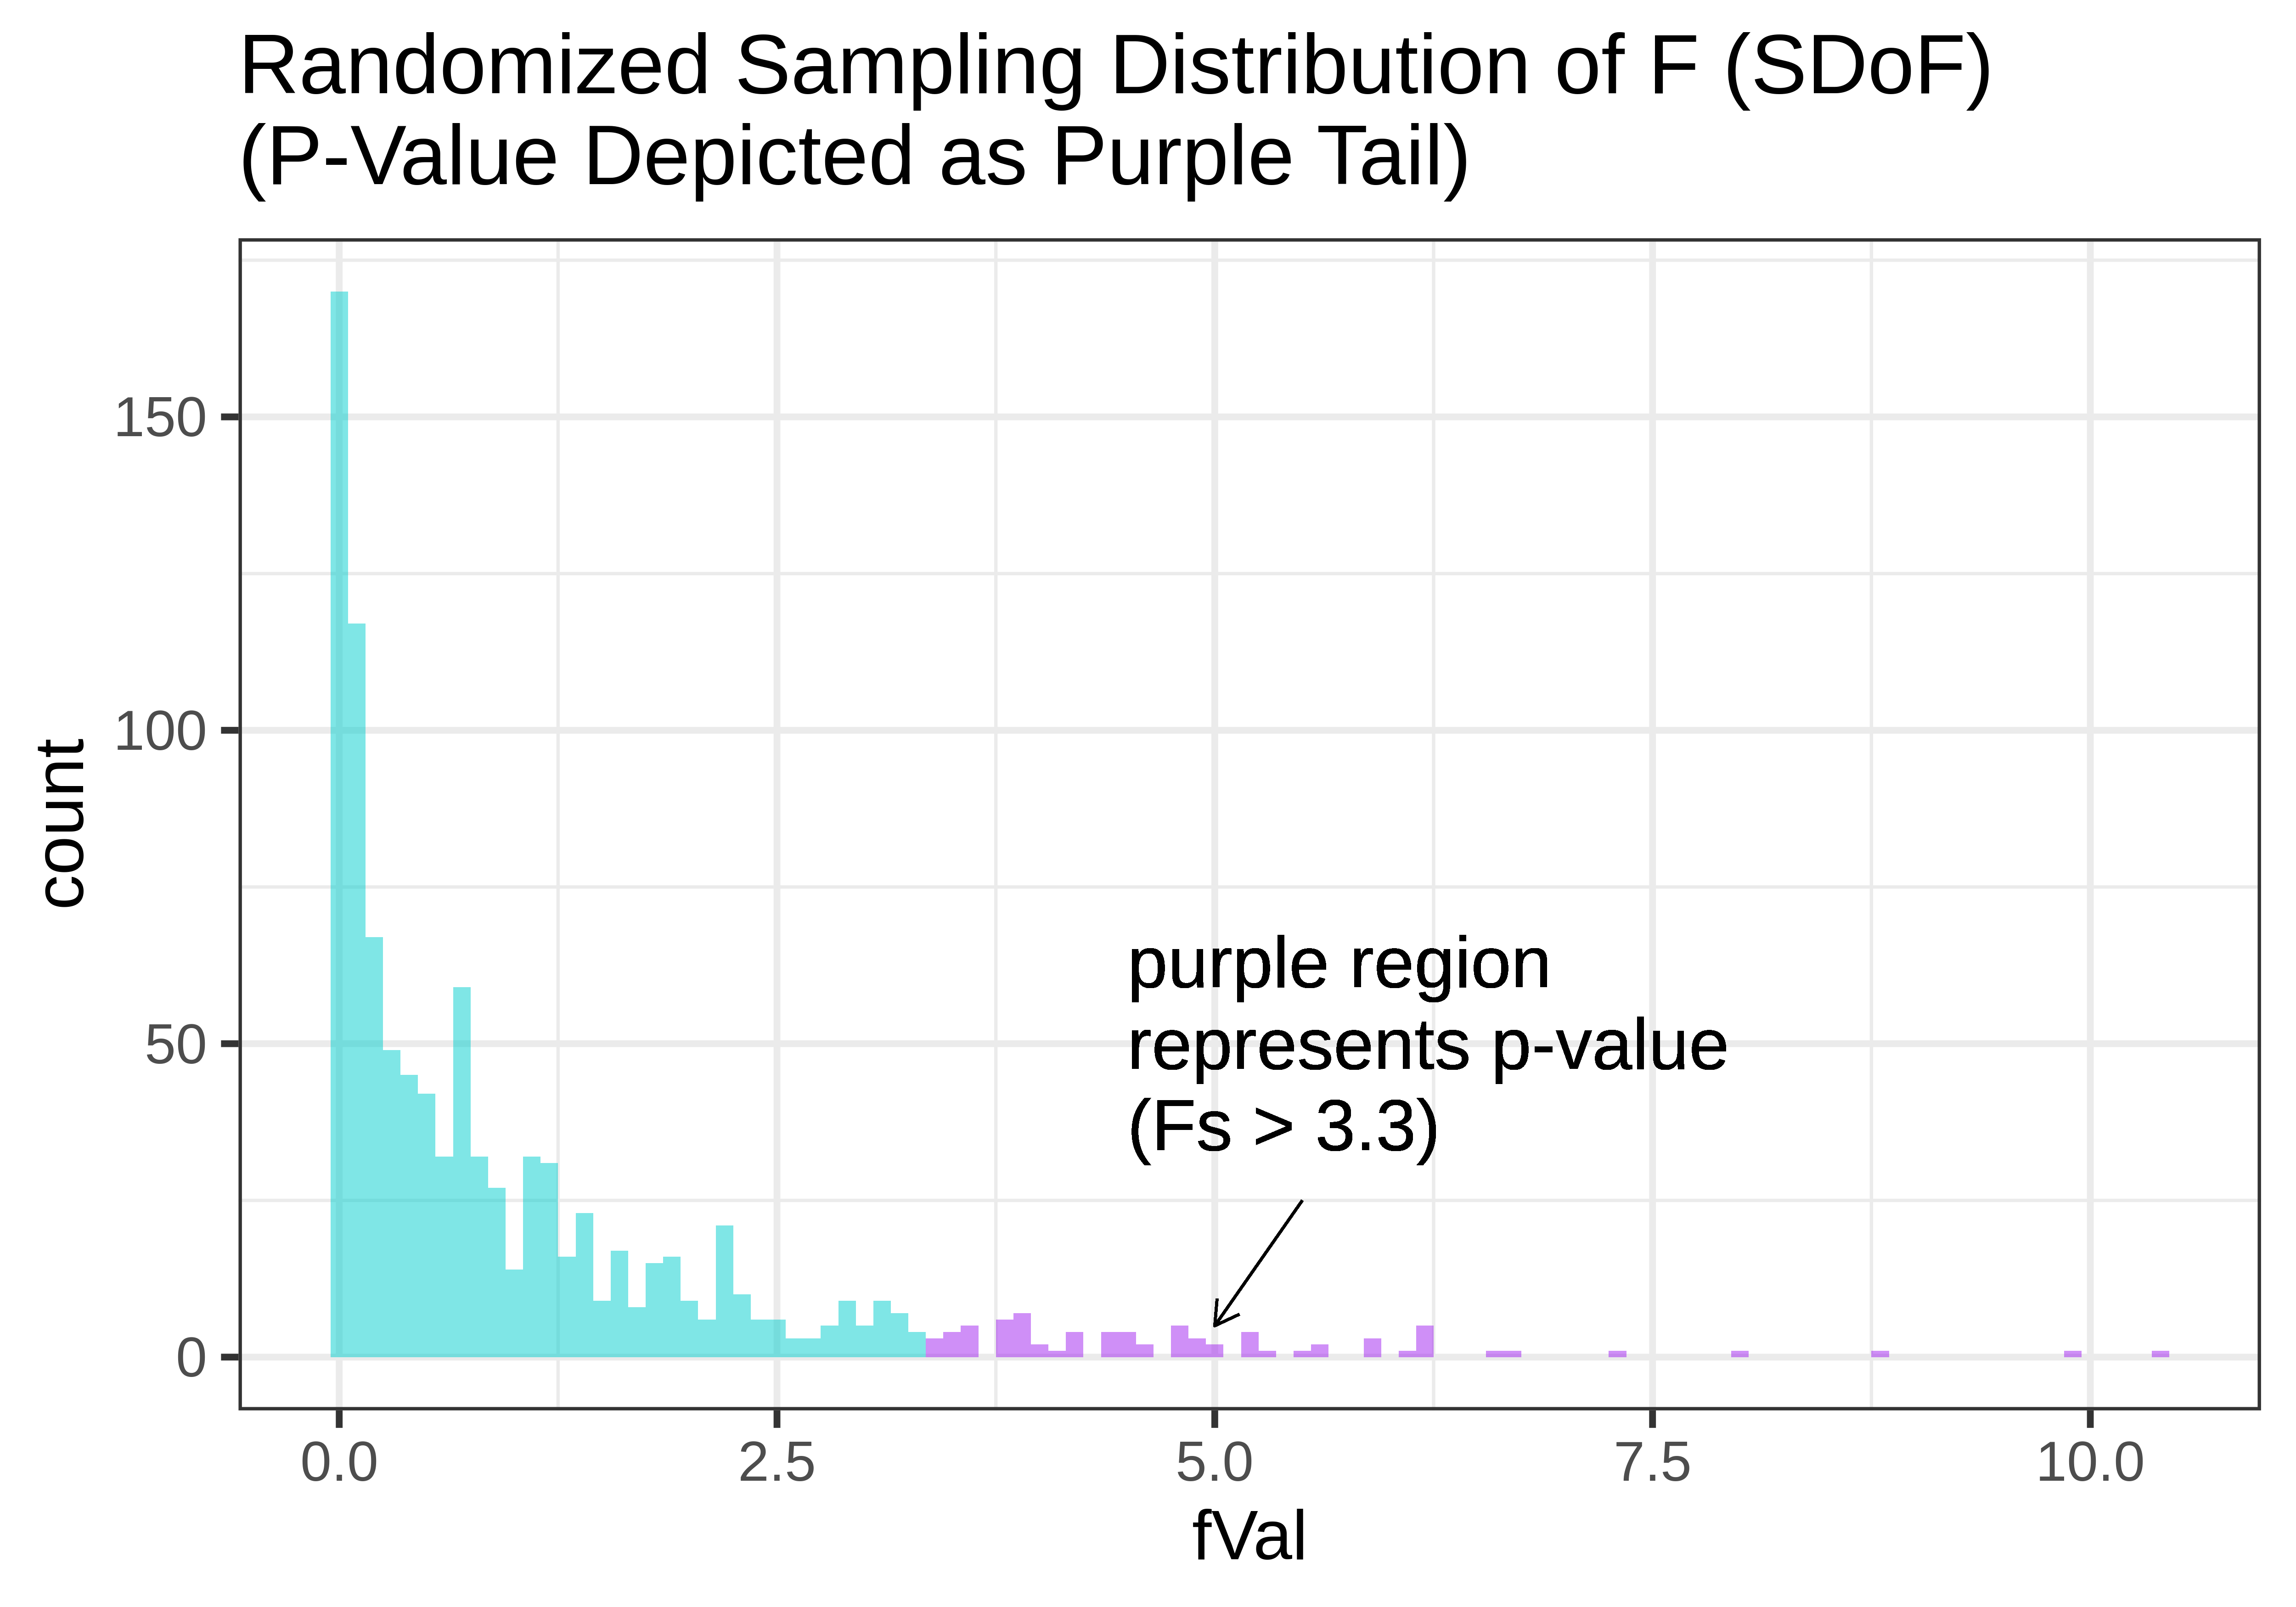 A histogram of the randomized sampling distribution of F on the left. It is skewed right, with most F's between zero and 2.5. and the tail extends from about 2.5 to about 10. The area of the tail that stretches from an F value of 3.3 and above has been shaded in purple and labeled as the region that represents p-value, or all the F's greater than 3.3.